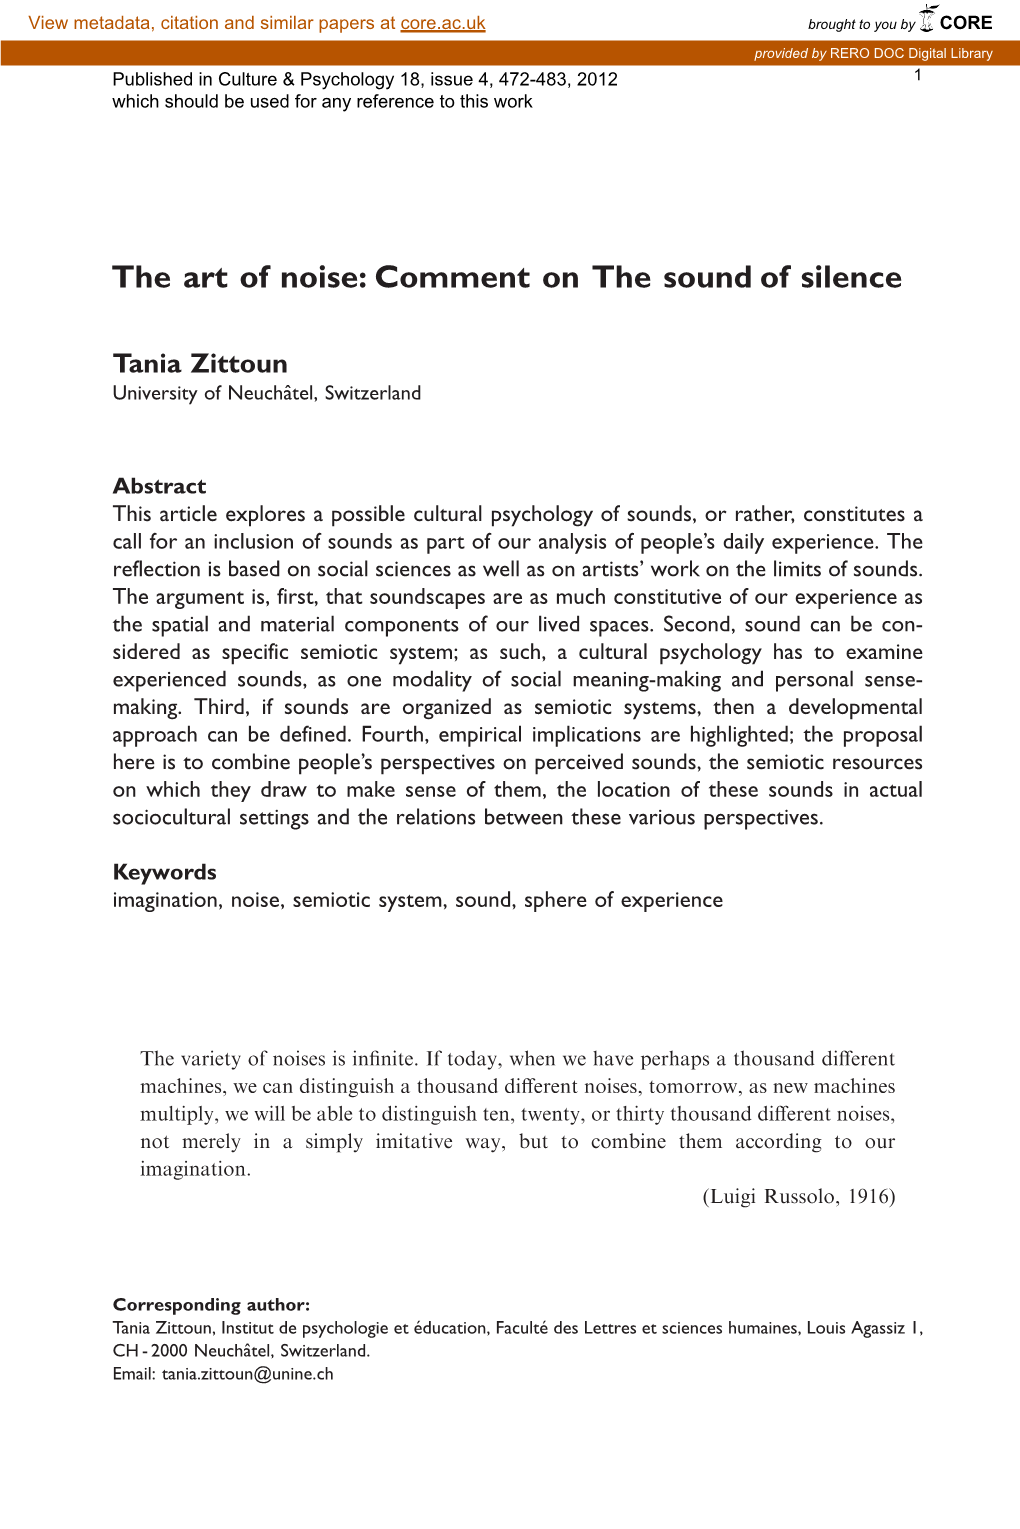 The Art of Noise: Comment on the Sound of Silence